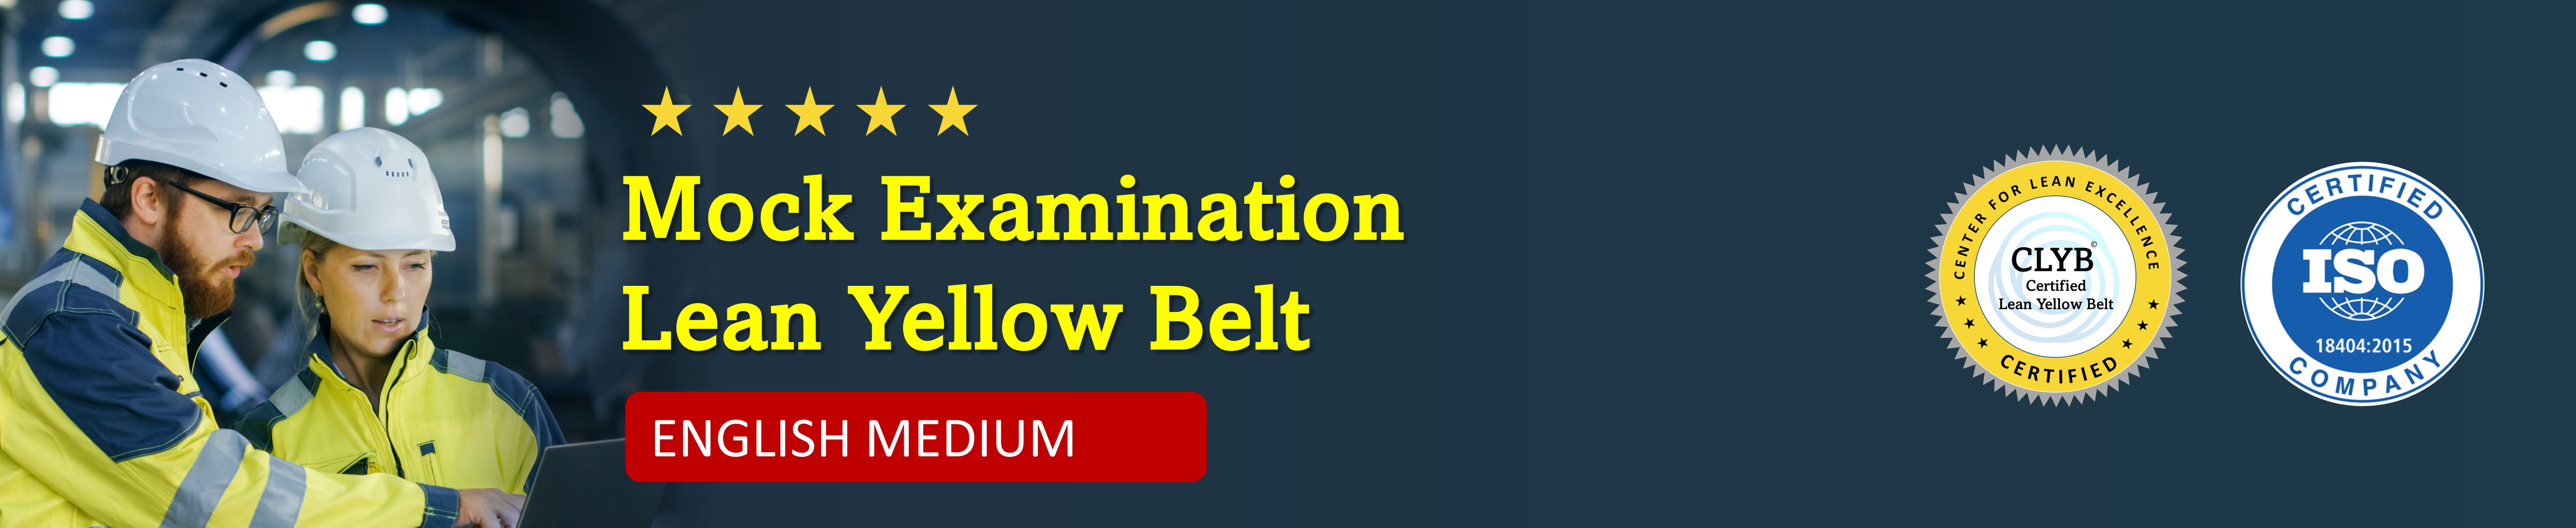 Mock Exam - Lean Yellow Belt | The up-to-date localized Lean Body of